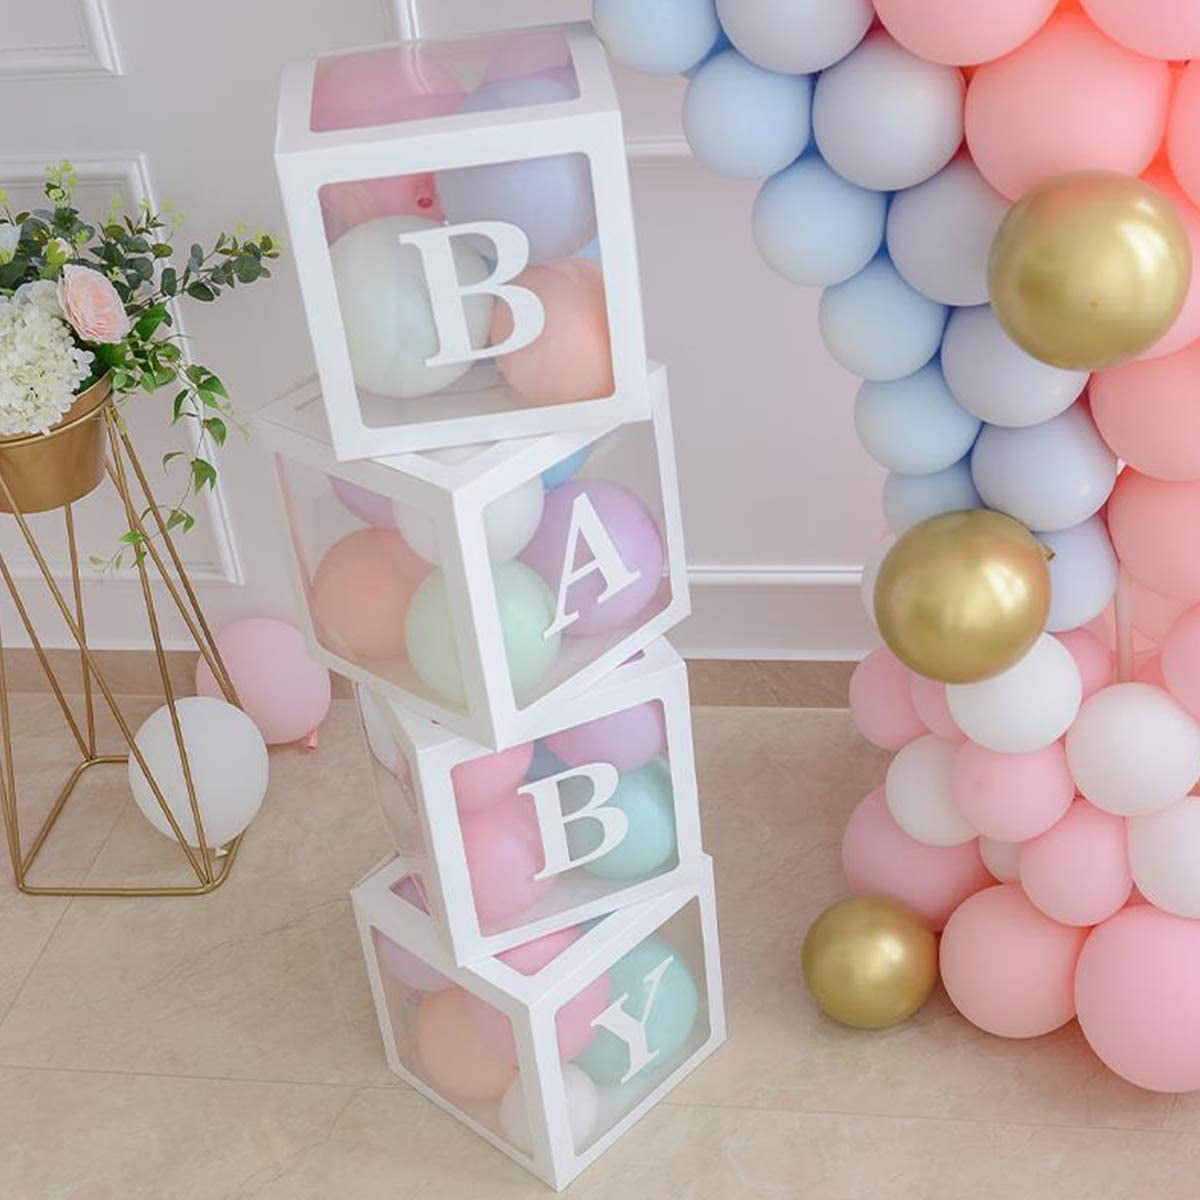 4PCS Merry Christmas Transparent Box,Balloon Box,Red Transparent Balloons Boxes with Xmas Letters,Include 20 Balloons